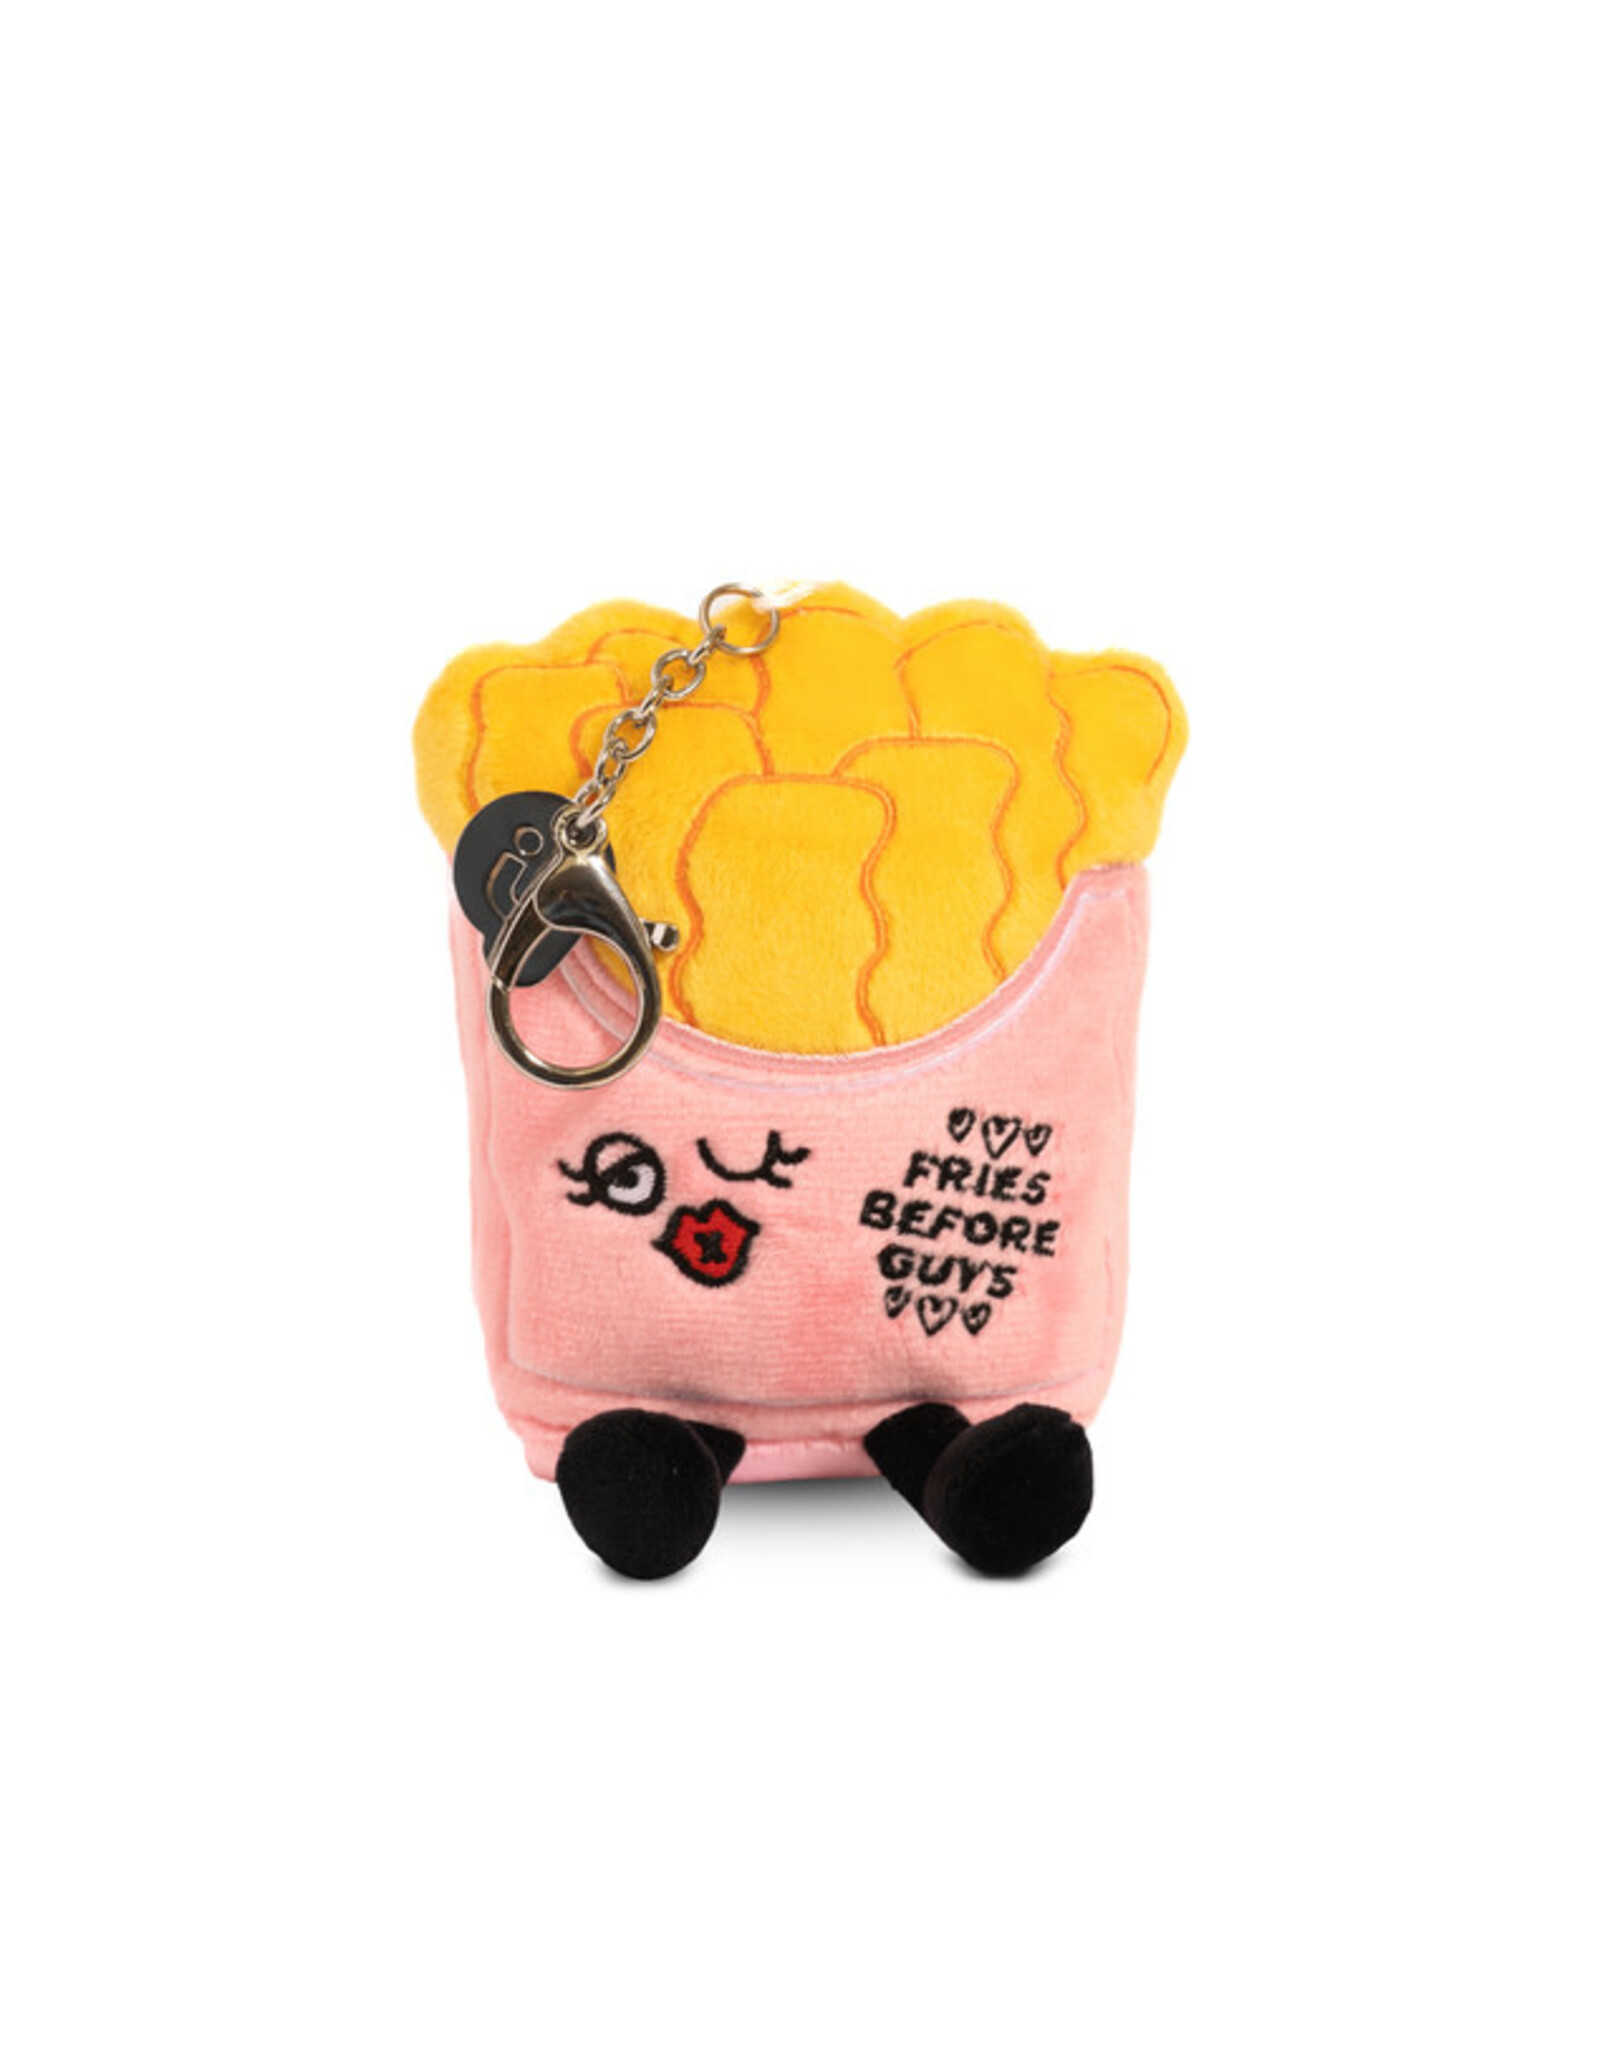 Punchkins Punchkins Bites Fries Before Guys French Fries Bag Charm